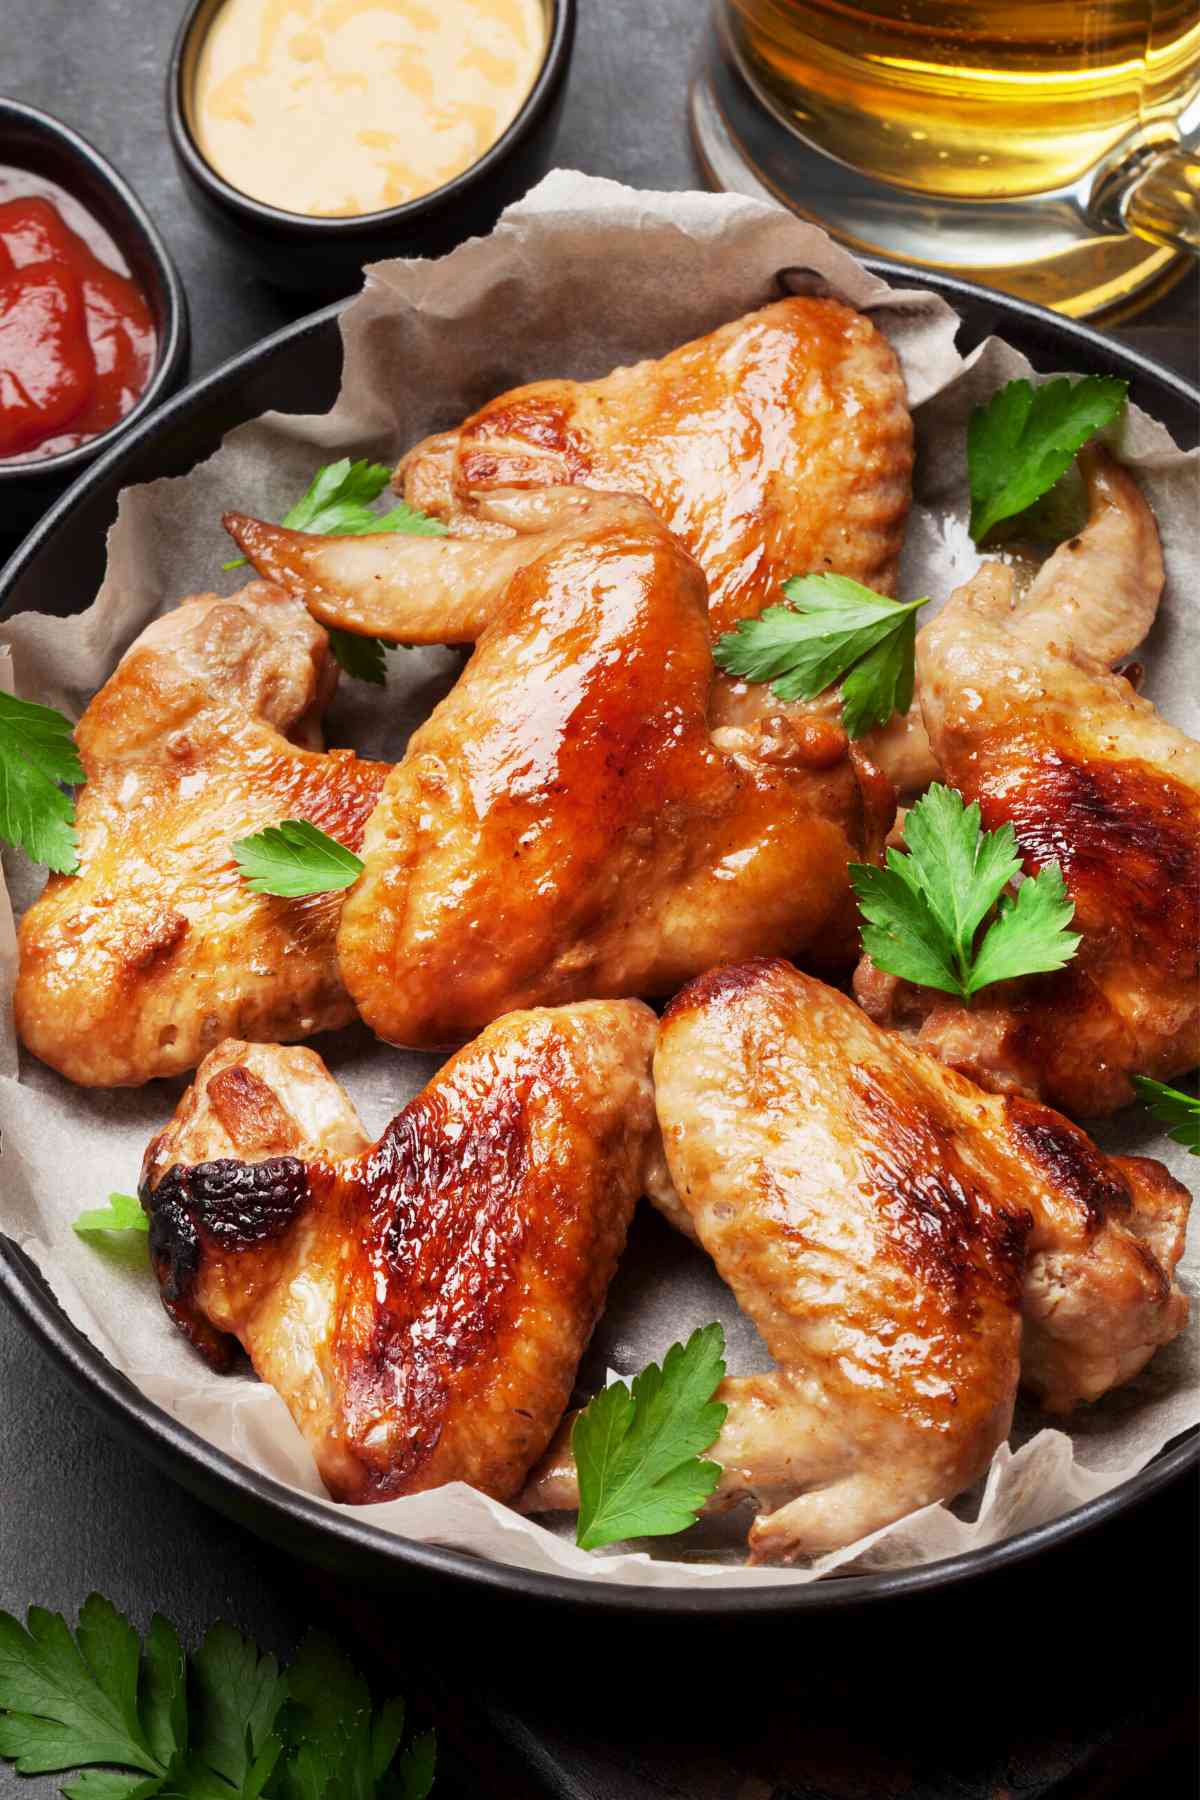 How do you get chicken wings to be as juicy and mouth-watering as possible? It all comes down to the best Chicken Wing's Internal Temperature.